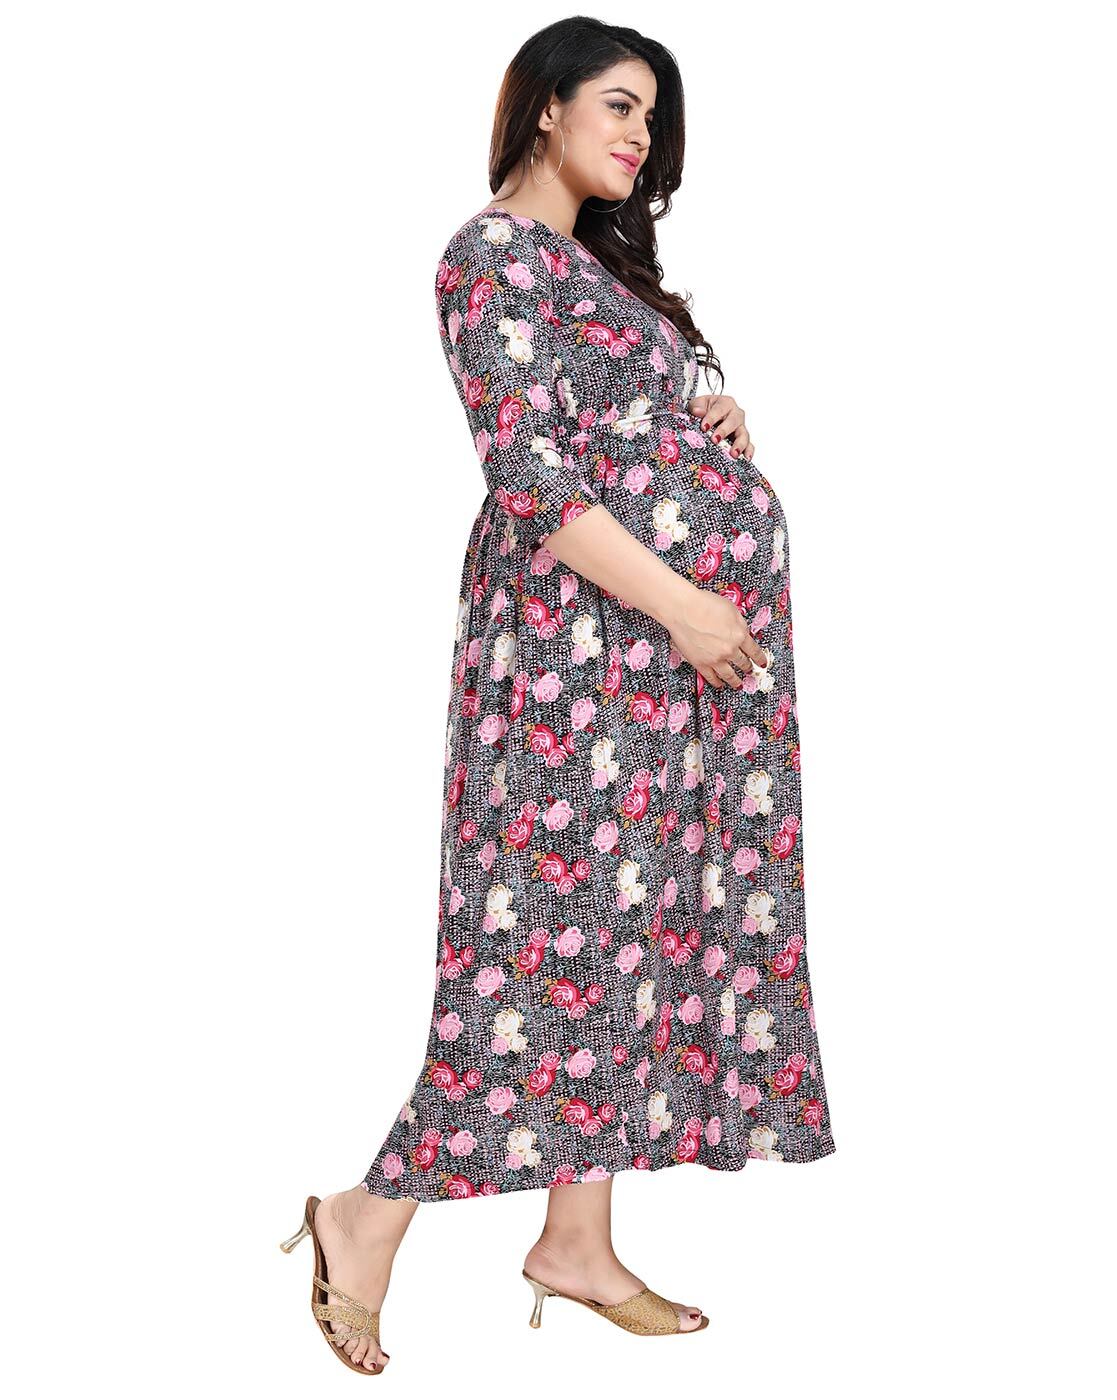 Maternity outs | Maternity dresses for photoshoot, Maternity dresses,  Indian maternity